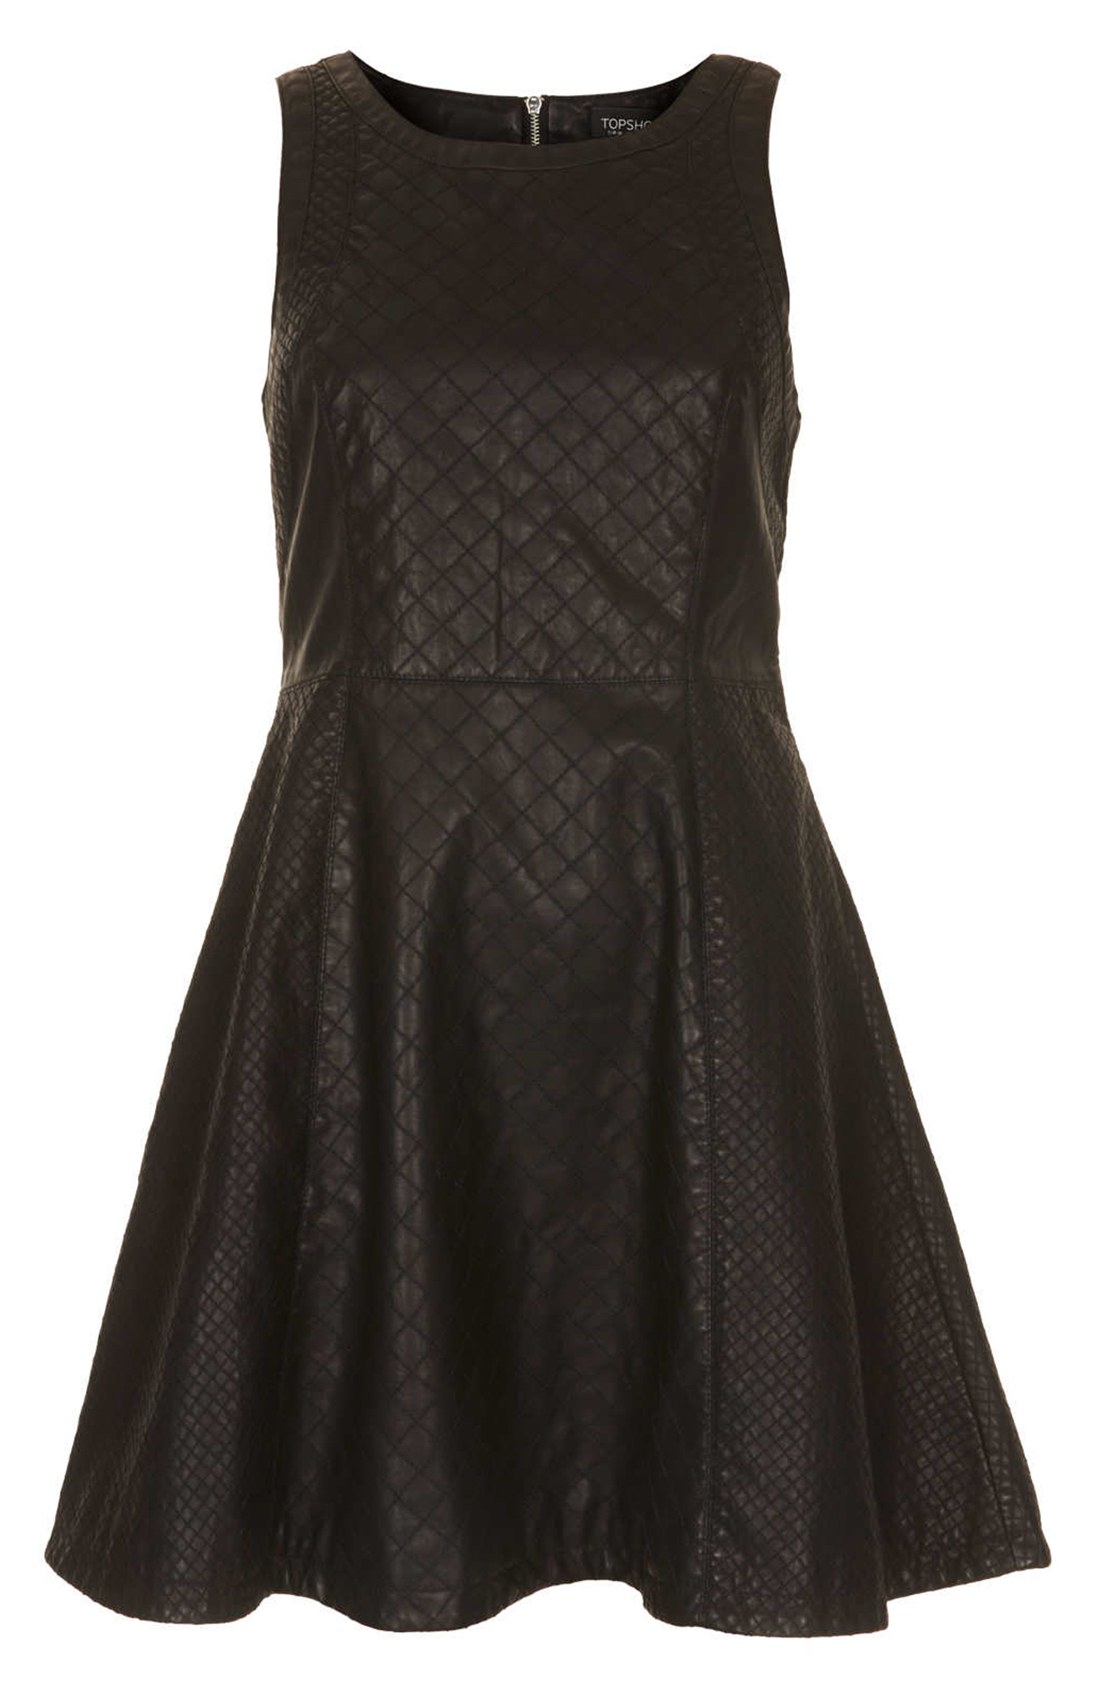 Topshop Mylo Quilted Faux Leather Skater Dress in Black | Lyst